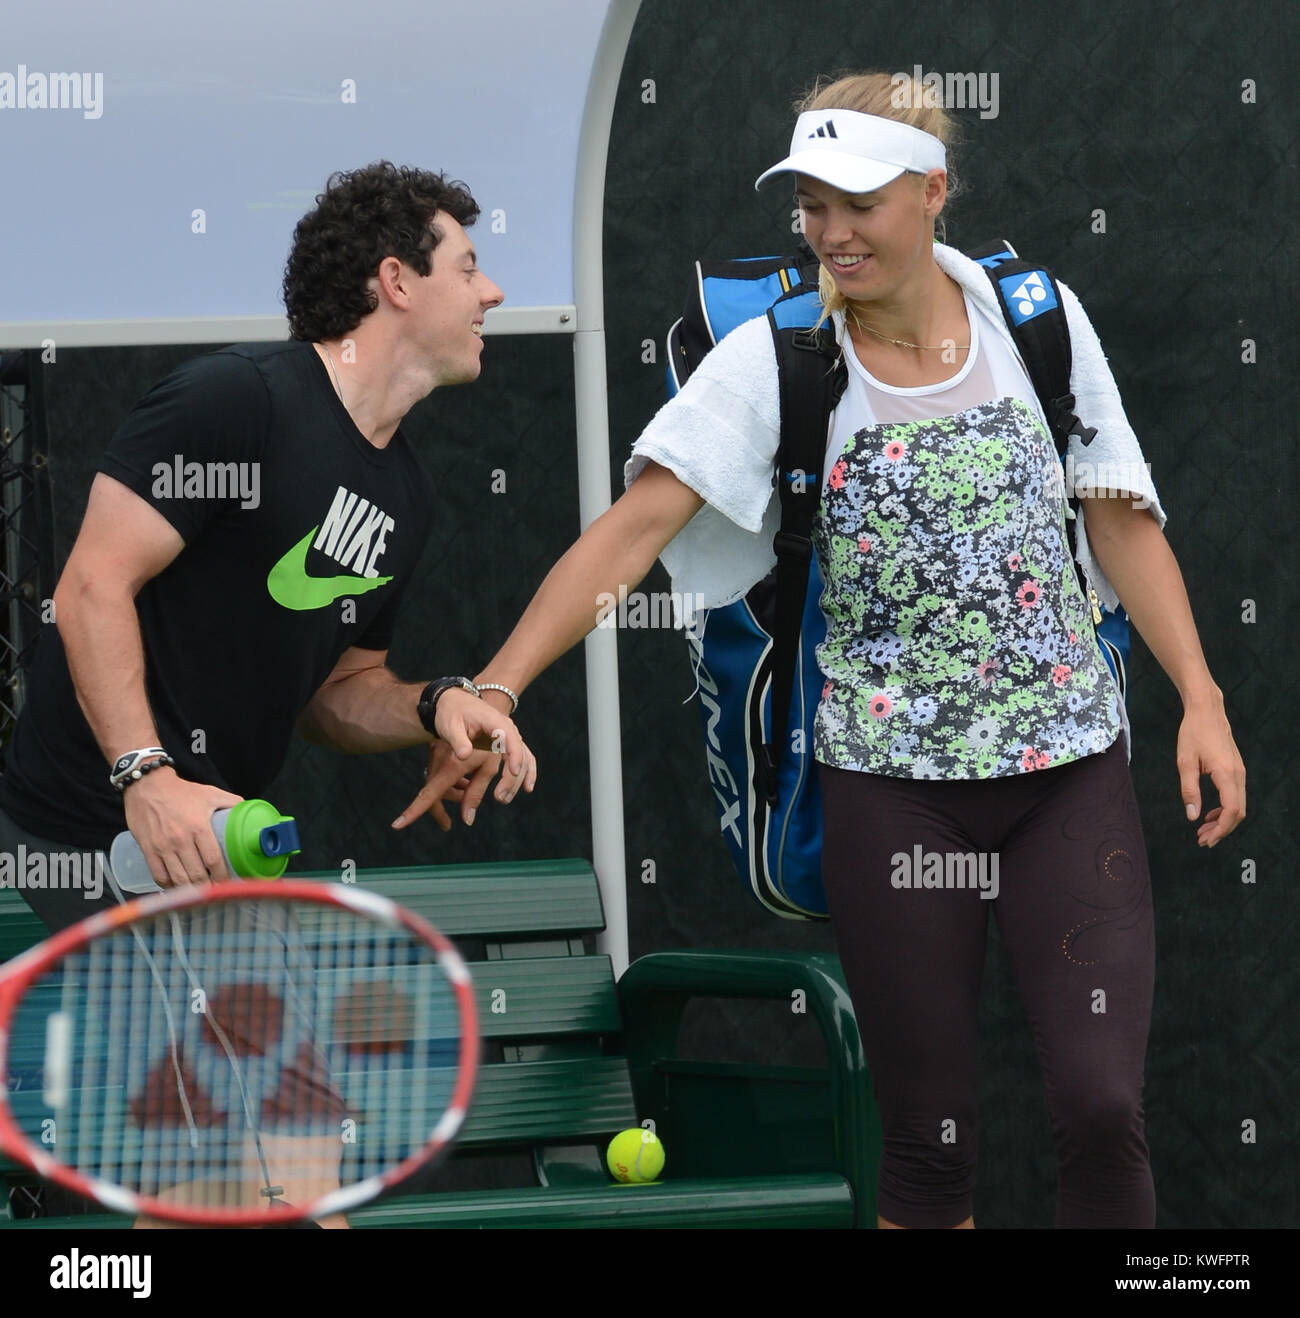 BREAKING NEWS One of sport's most high-profile couples are no more. Golf  star Rory McIlroy announced Wednesday that he had broken off his engagement  to tennis player Caroline Wozniacki. The two-time major